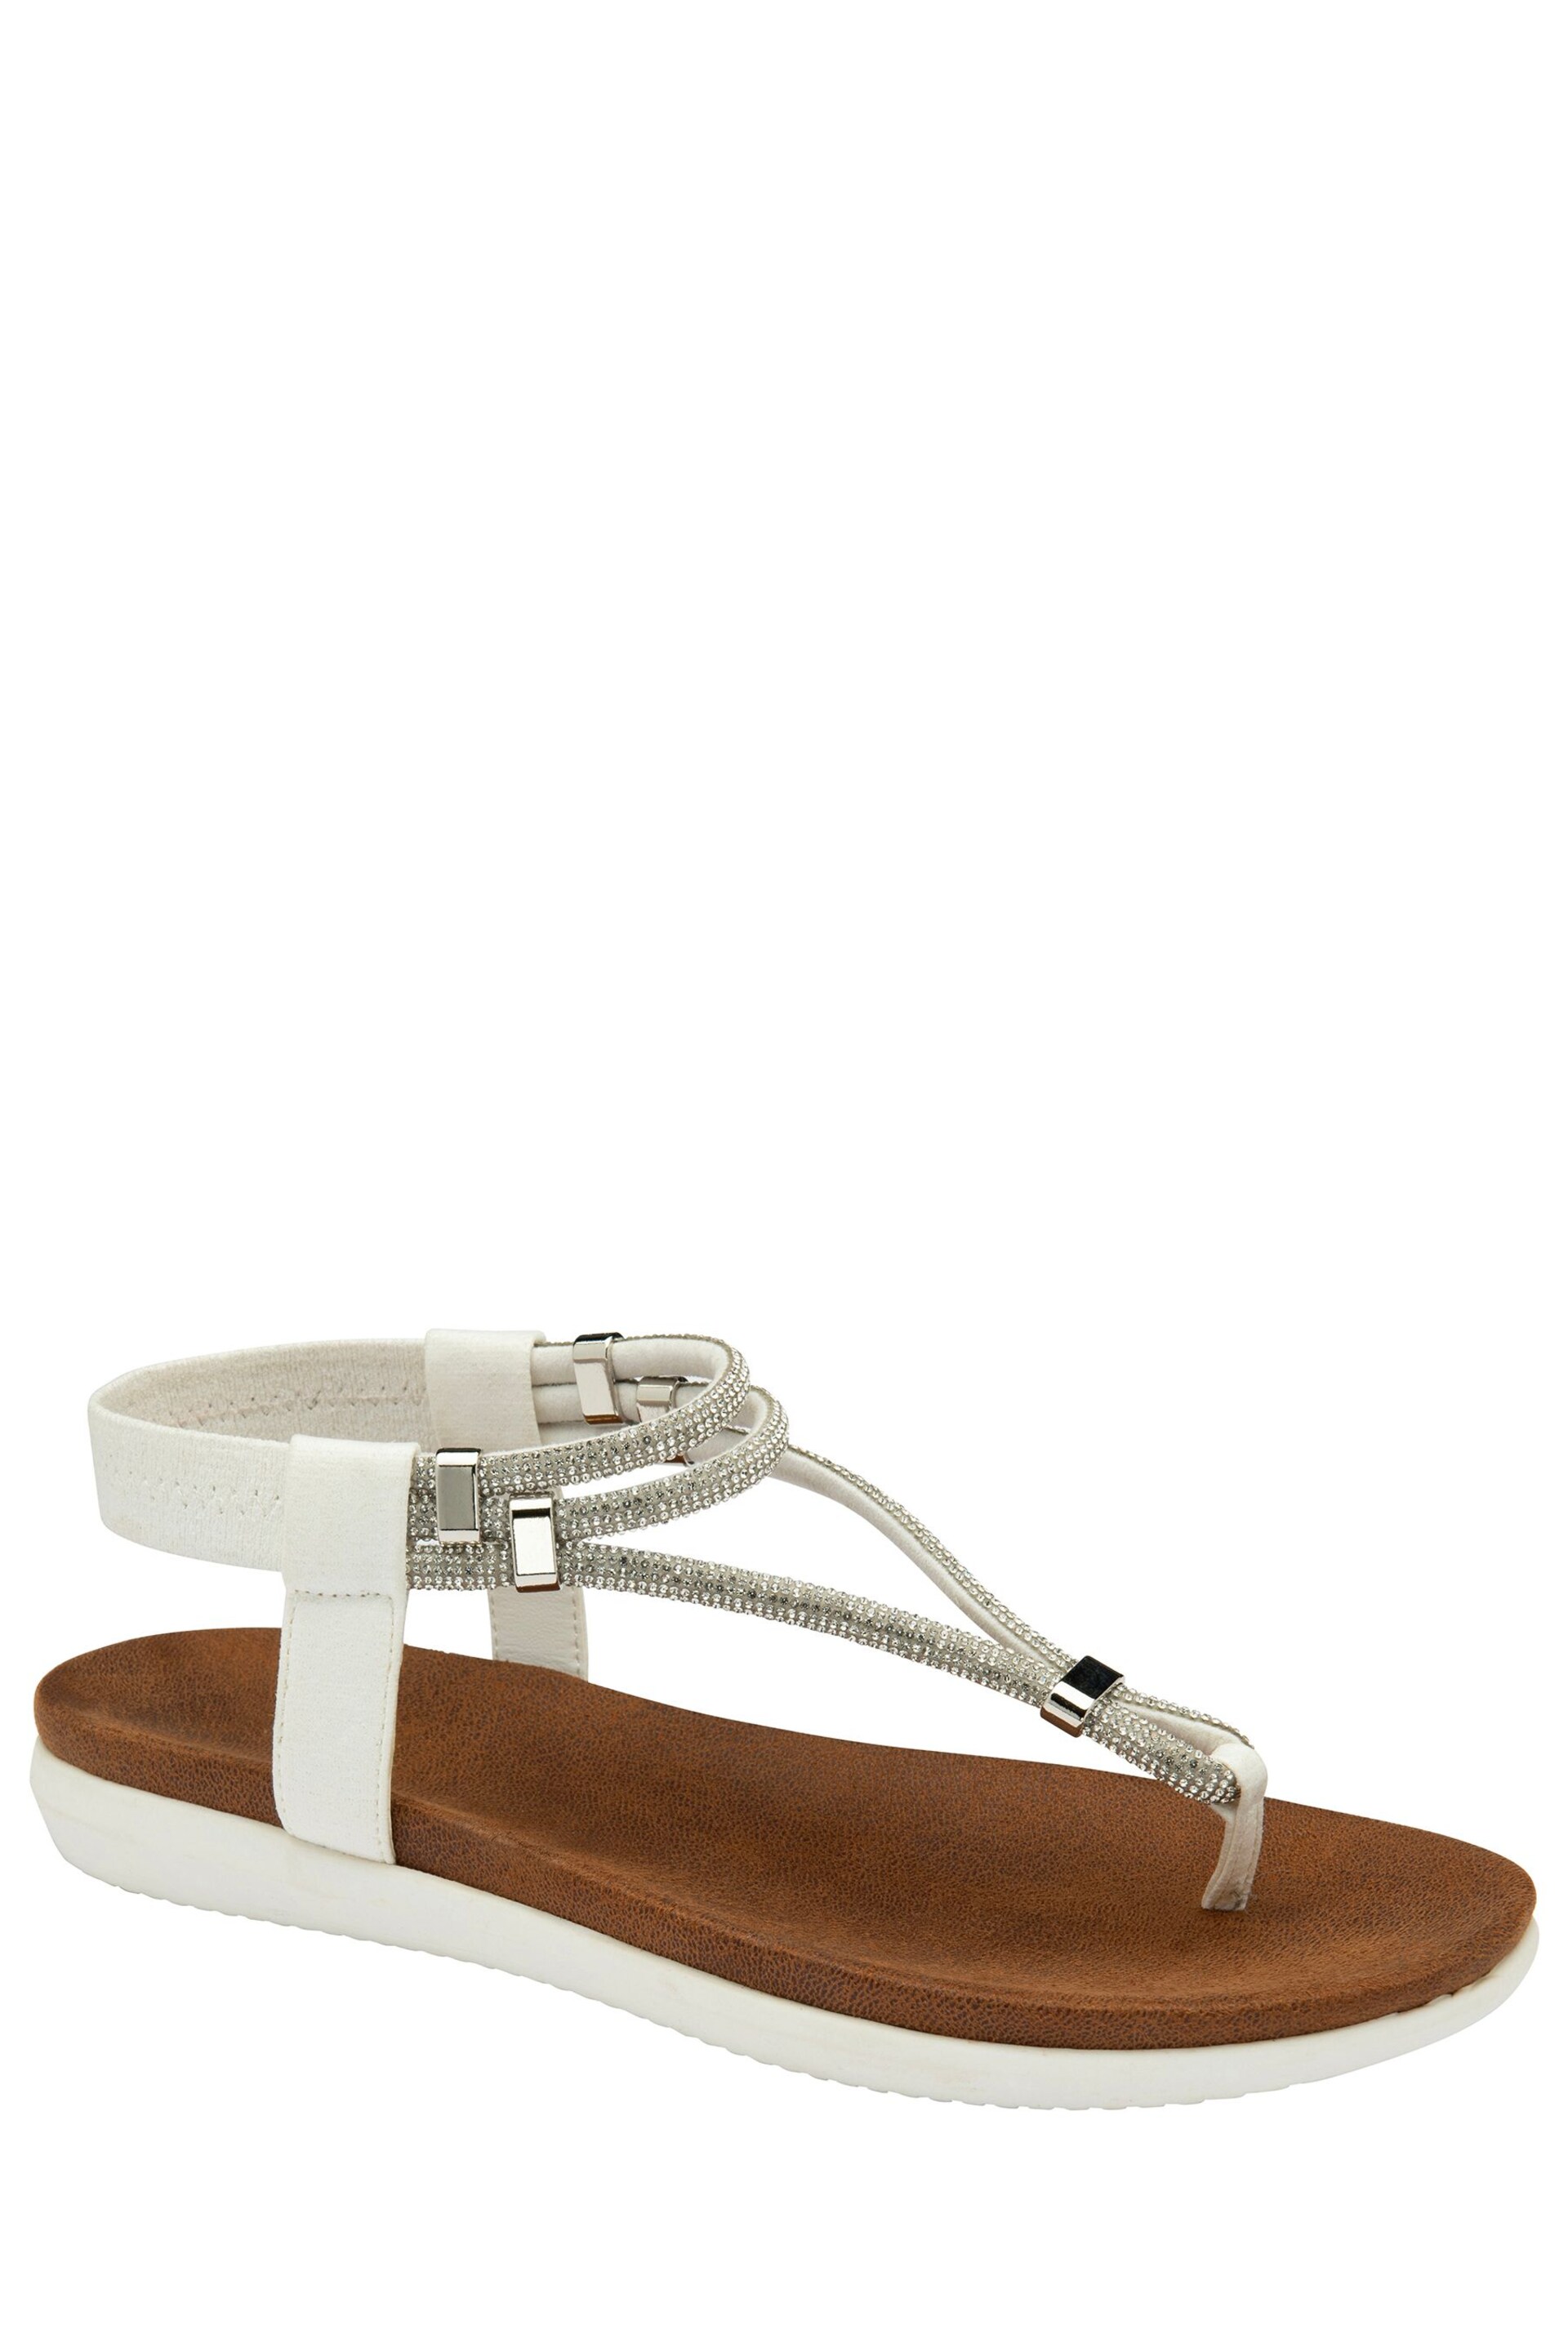 Lotus White Casual Toe Thong Sandals - Image 1 of 4